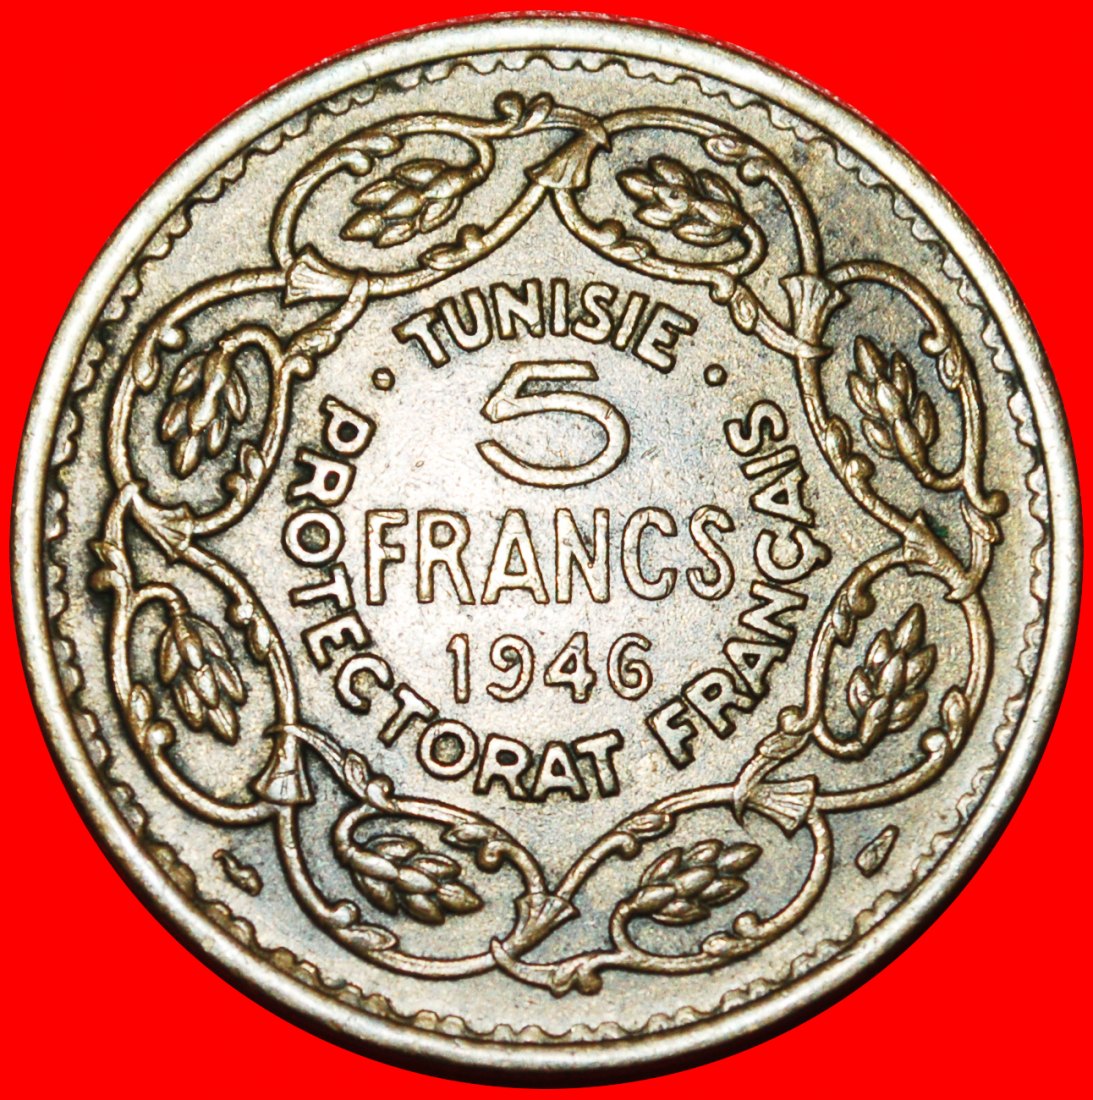  * PROTECTORATE of FRANCE: TUNISIA★5 FRANCS 1365-1946 MUHAMMAD VIII 1943-1957★LOW START ★ NO RESERVE!   